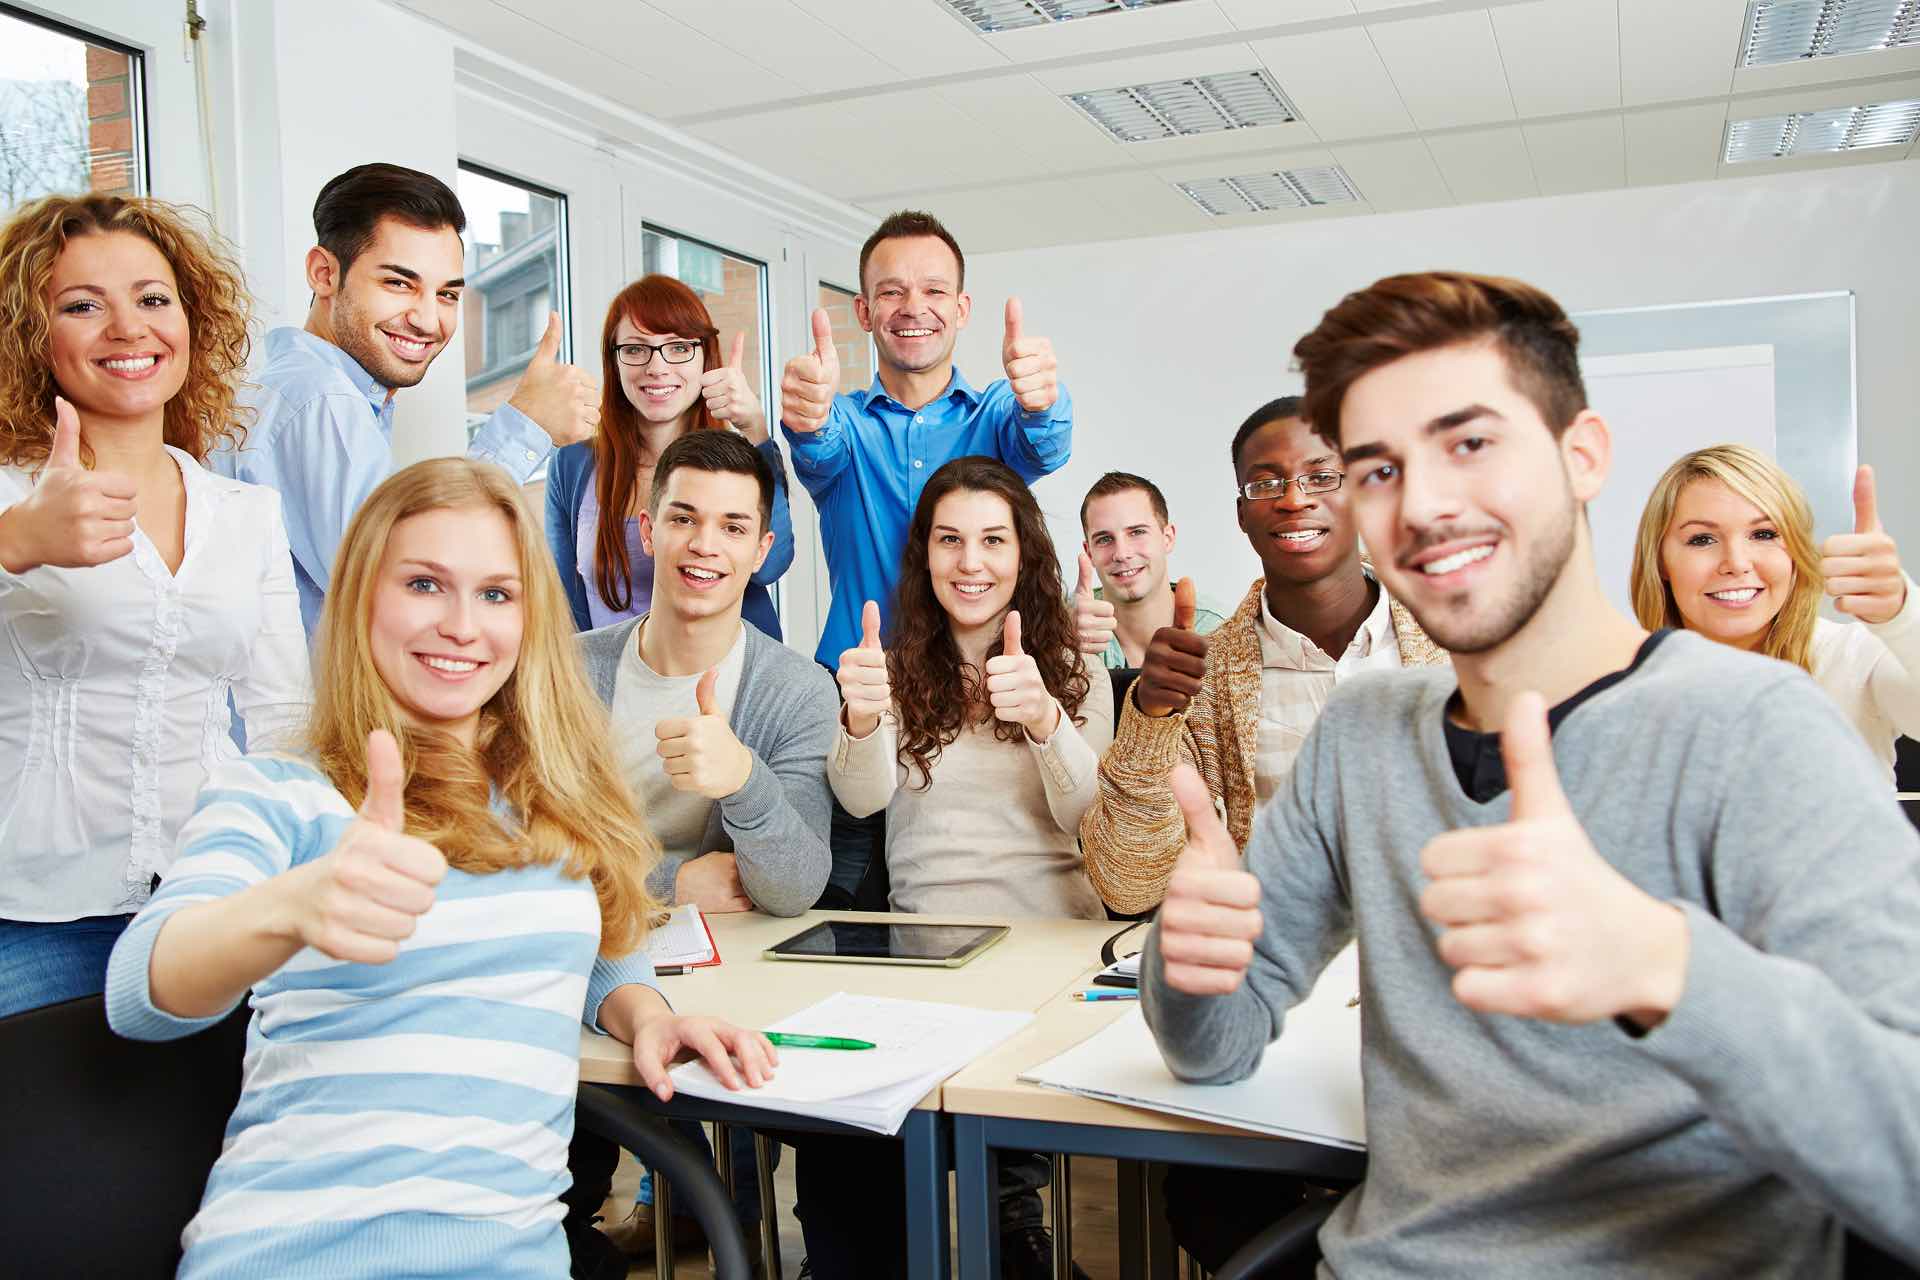 Many happy students with teacher holding their thumbs up in university